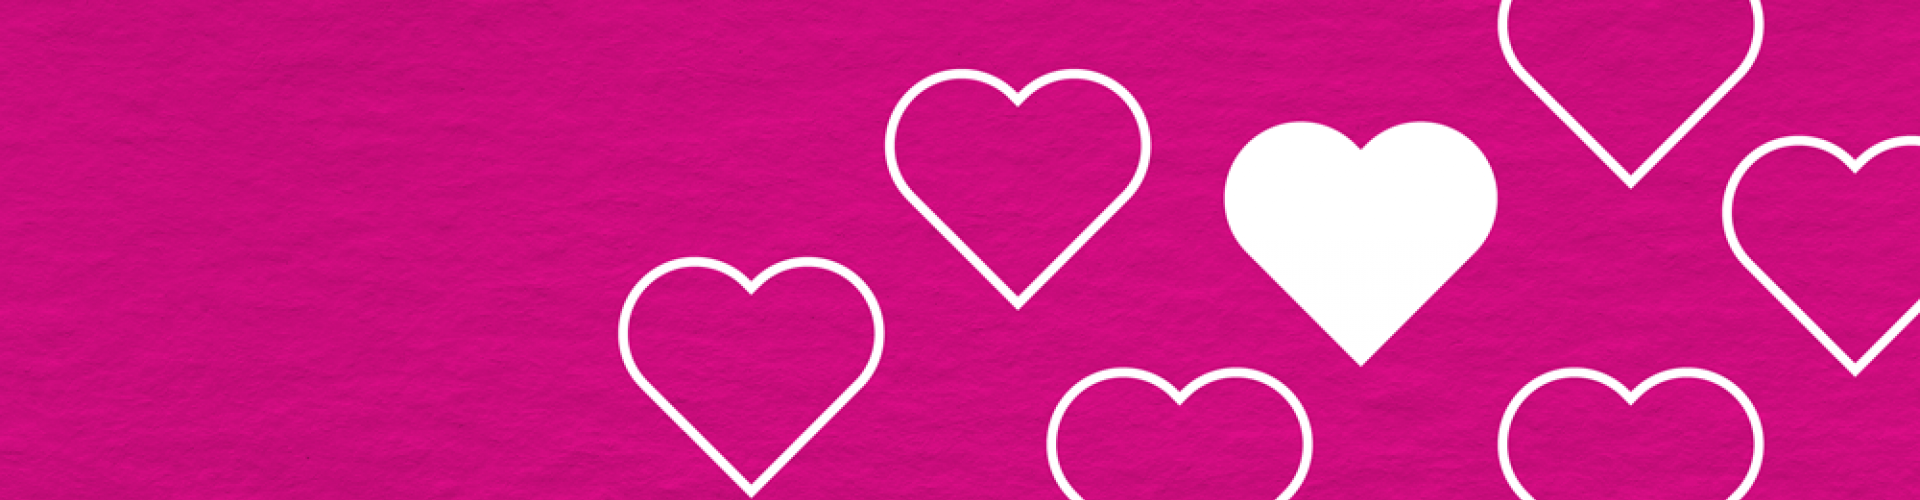 Pink background and white hearts